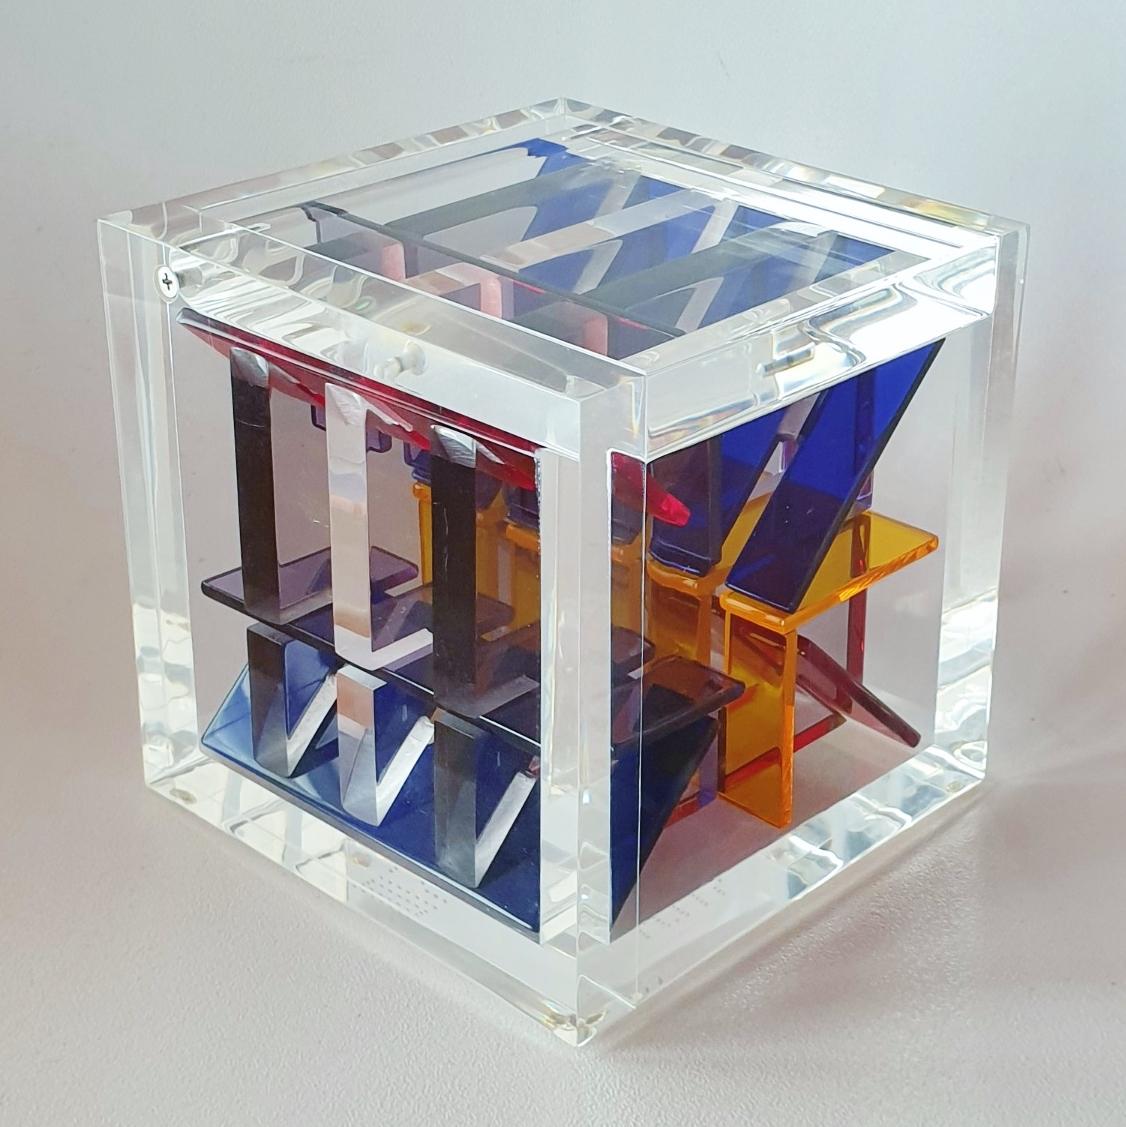 Homage to Van Doesburg is a unique small size contemporary modern cube sculpture by the famous Dutch artist couple Nel Haringa and Fred Olijve. The cube sculpture consists of a dozen hand cut hand polished plexiglass elements carefully stacked